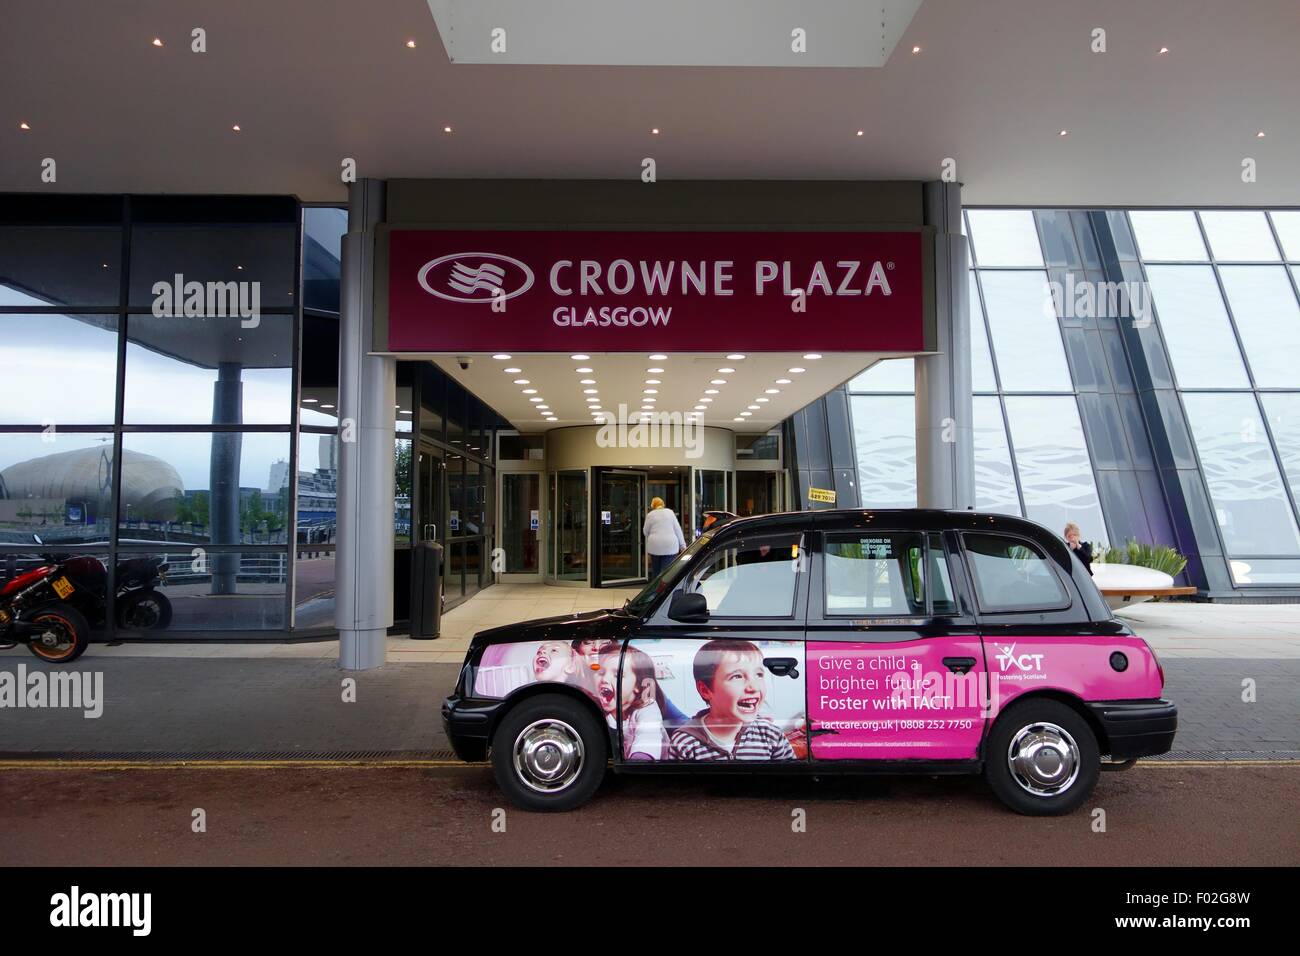 A Hackney taxi stopped outside the entrance of the Crowne Plaza hotel in Congress Rd, Glasgow, Scotland, Uk, Europe Stock Photo